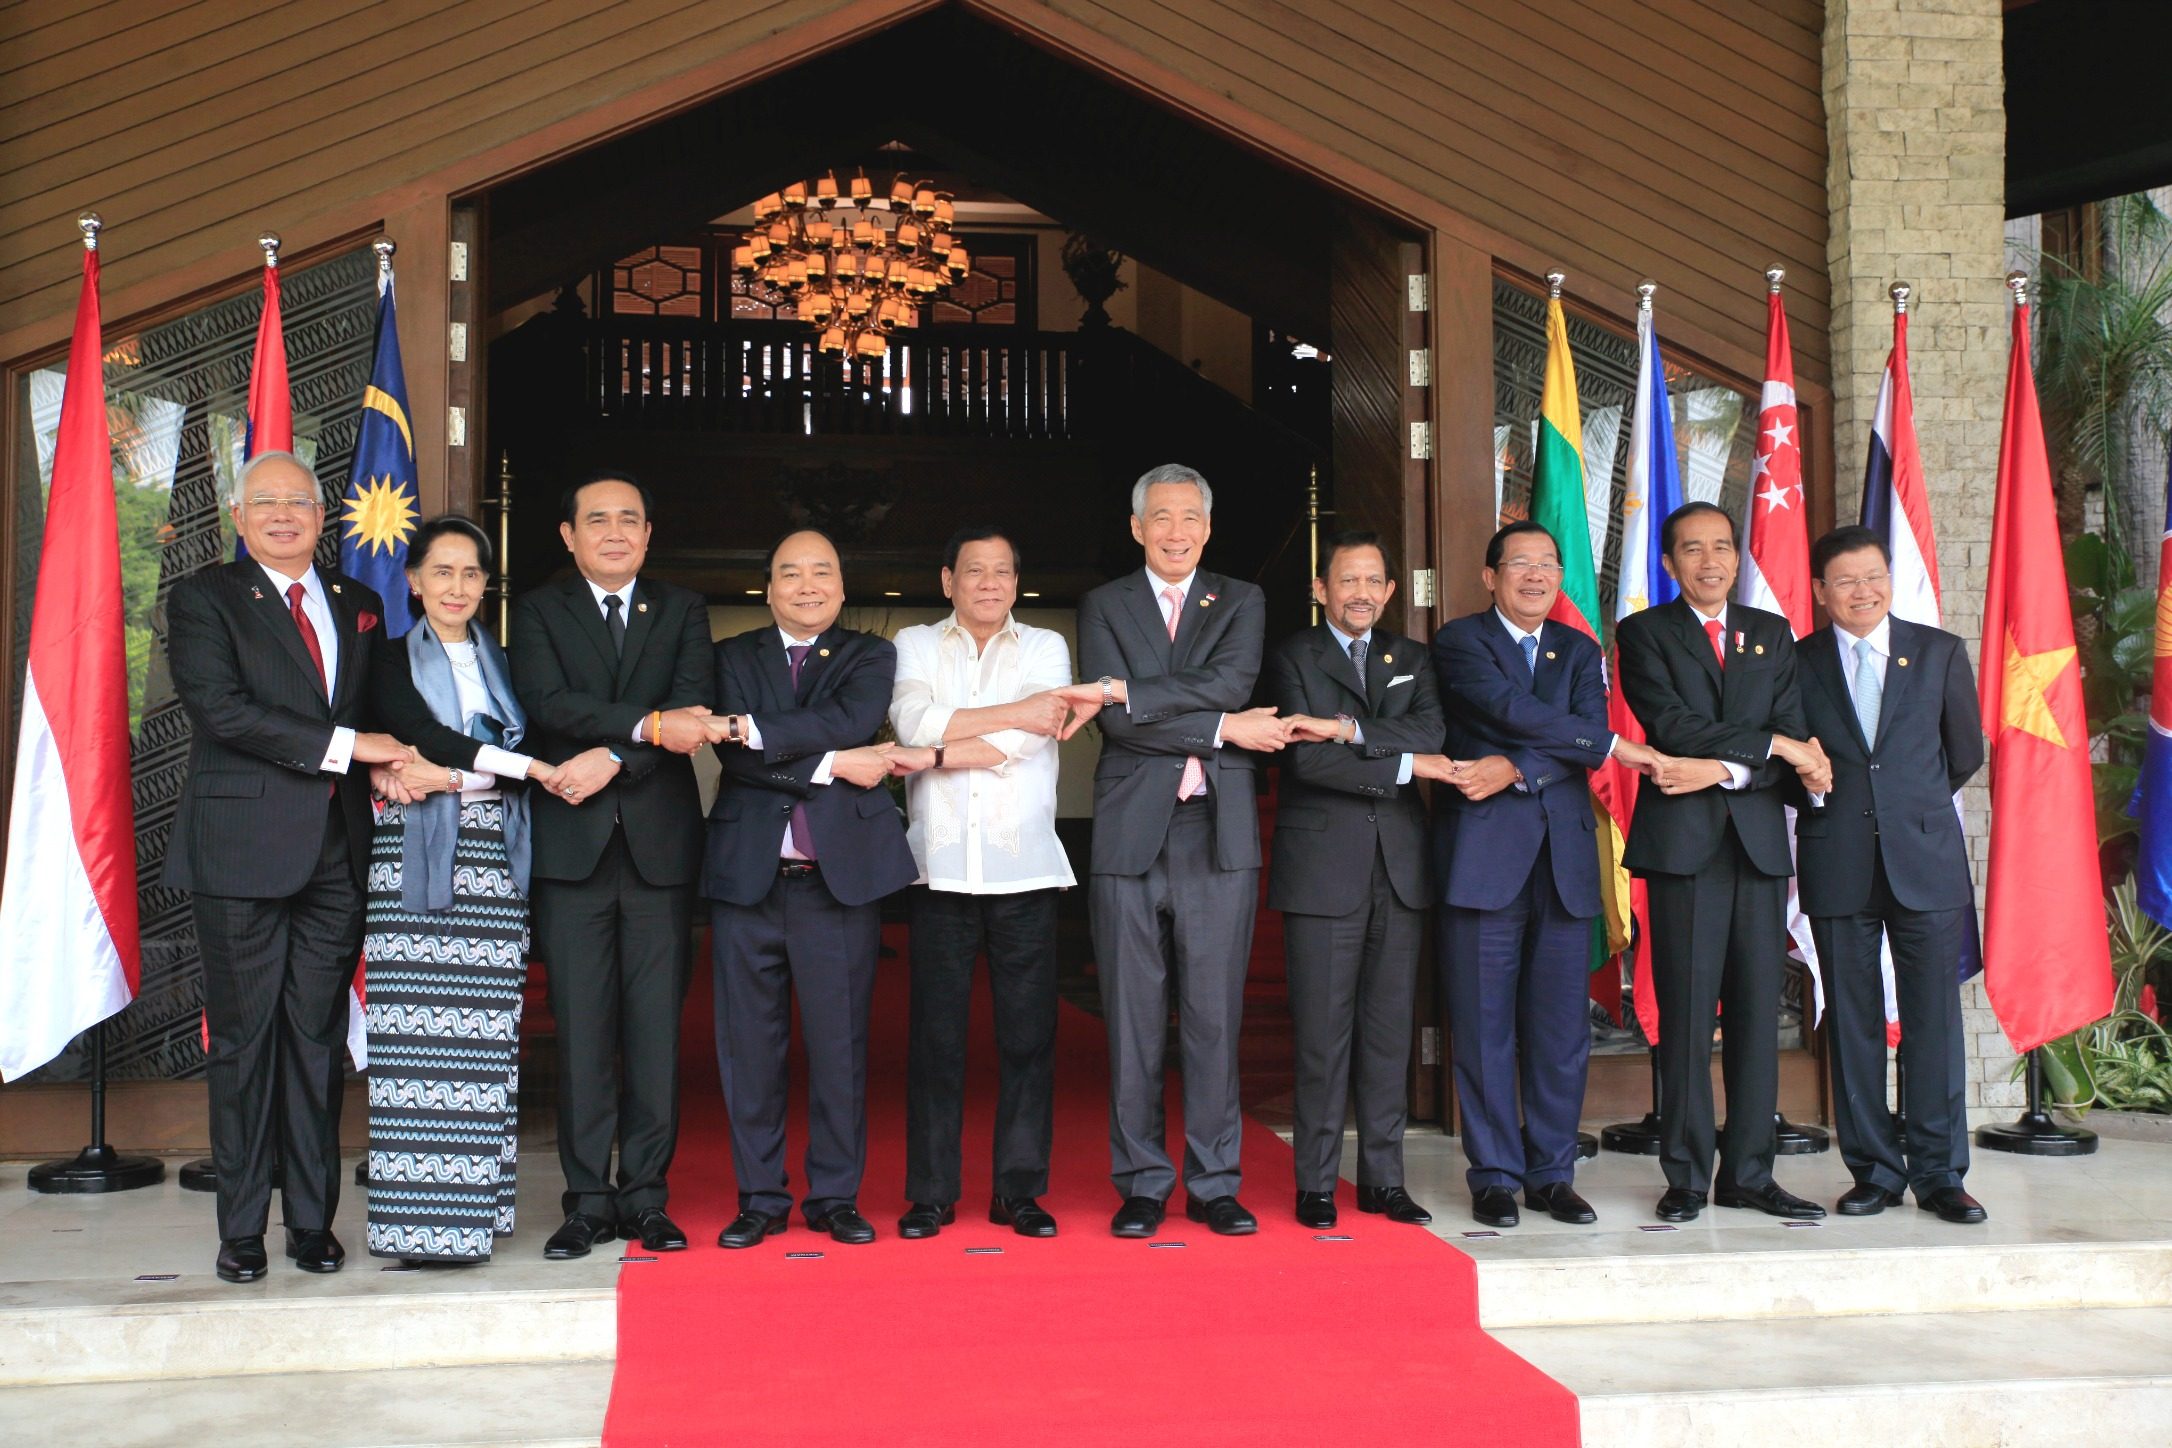 Malaysian Prime Minister Najib Razak (1st L), Myanmar State Counsellor Aung San Suu Kyi (2nd L), Thailand Prime Minister Prayuth Chan-o-cha (3rd L), Vietnamese Prime Minister Nguyen Xuan Phuc (4th L), Philippine President Rodrigo Duterte (5th L), Singapore Prime Minister Lee Hsien Loong (5th R), Sultan of Brunei Hassanal Bolkiah (4th R), Cambodian Prime Minister Hun Sen (3rd R), Indonesian President Joko Widodo (2nd R), Laos Prime Minister Thongloun Sisoulith (1st R) hold hands during the group photo of the 30th Association of Southeast Asian Nations (ASEAN) Summit at the Coconut Palace in Pasay City on Saturday, April 29, 2017. Pool Photo 